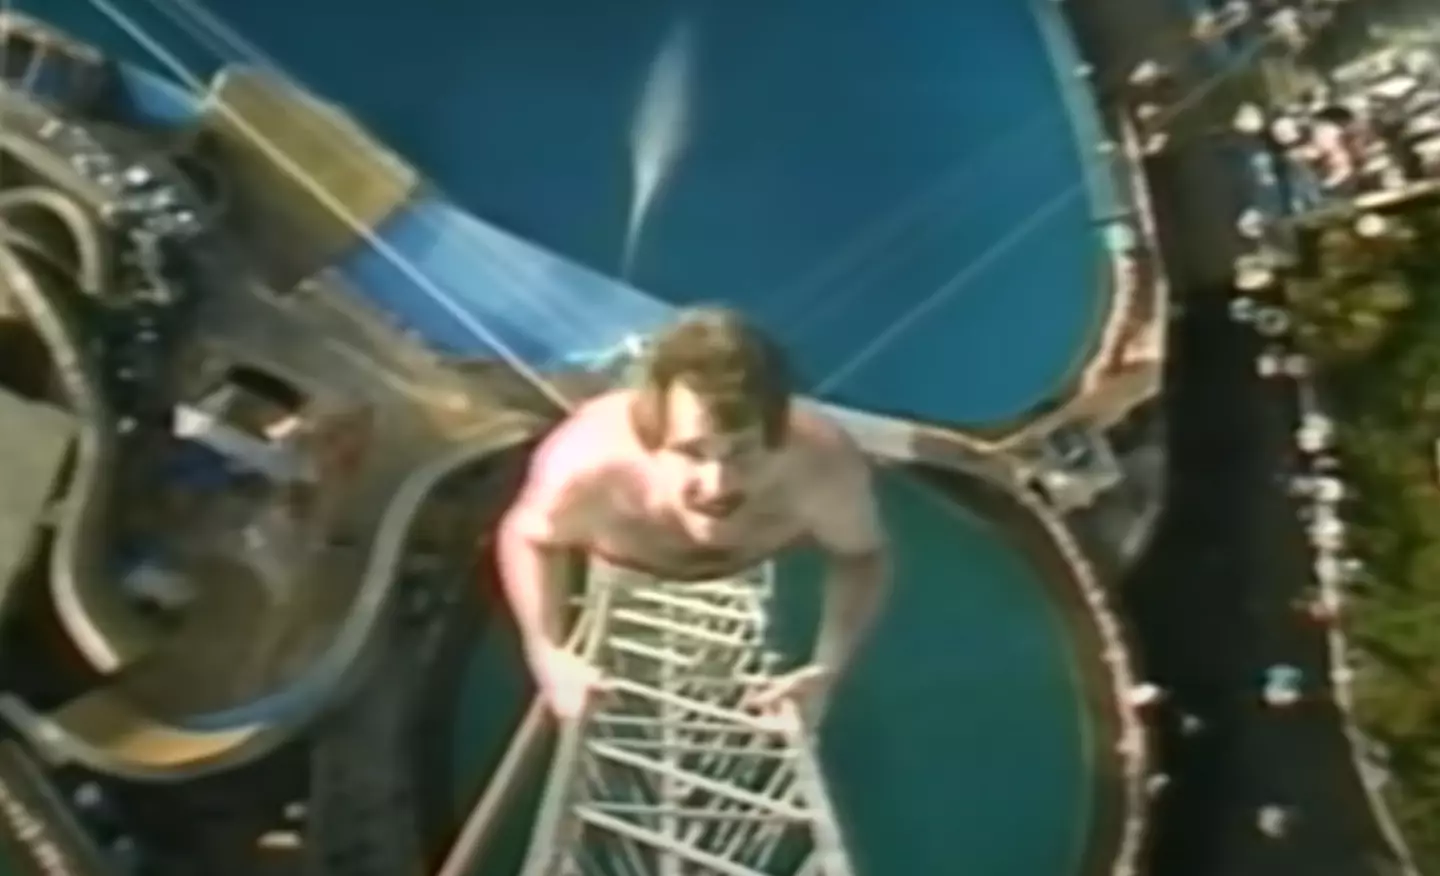 The video showed that seconds later Winters somersaulted off the platform into the pool below at a height of 172 feet.